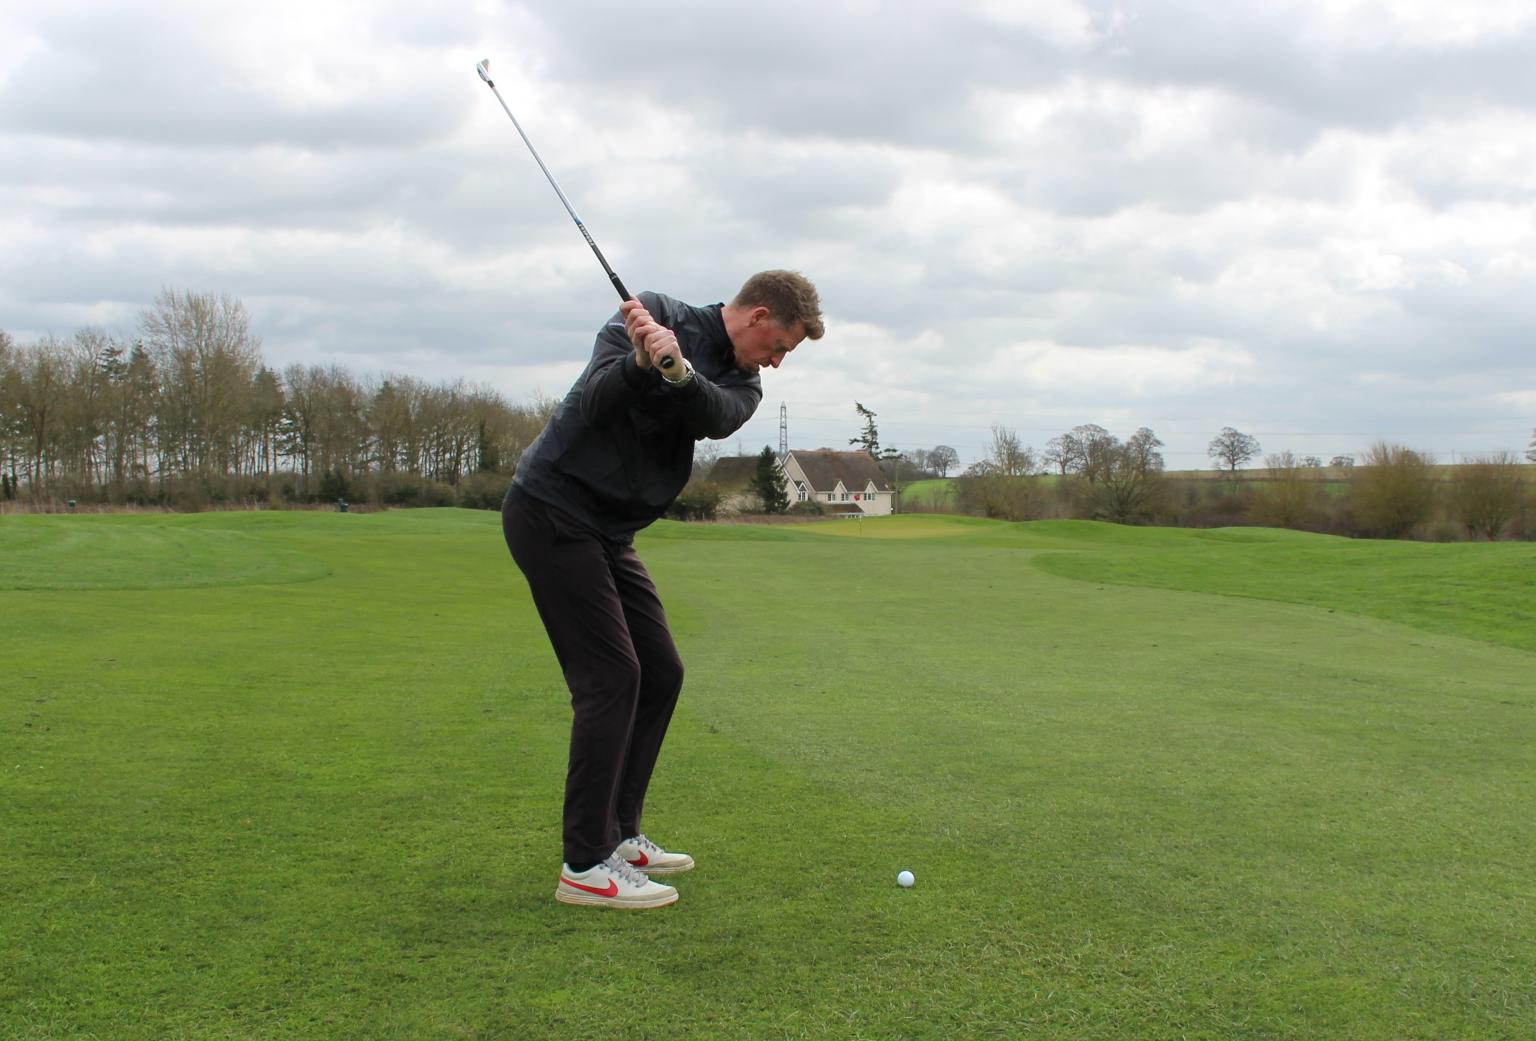 How to get your golf swing takeaway on plane every time | GolfMagic